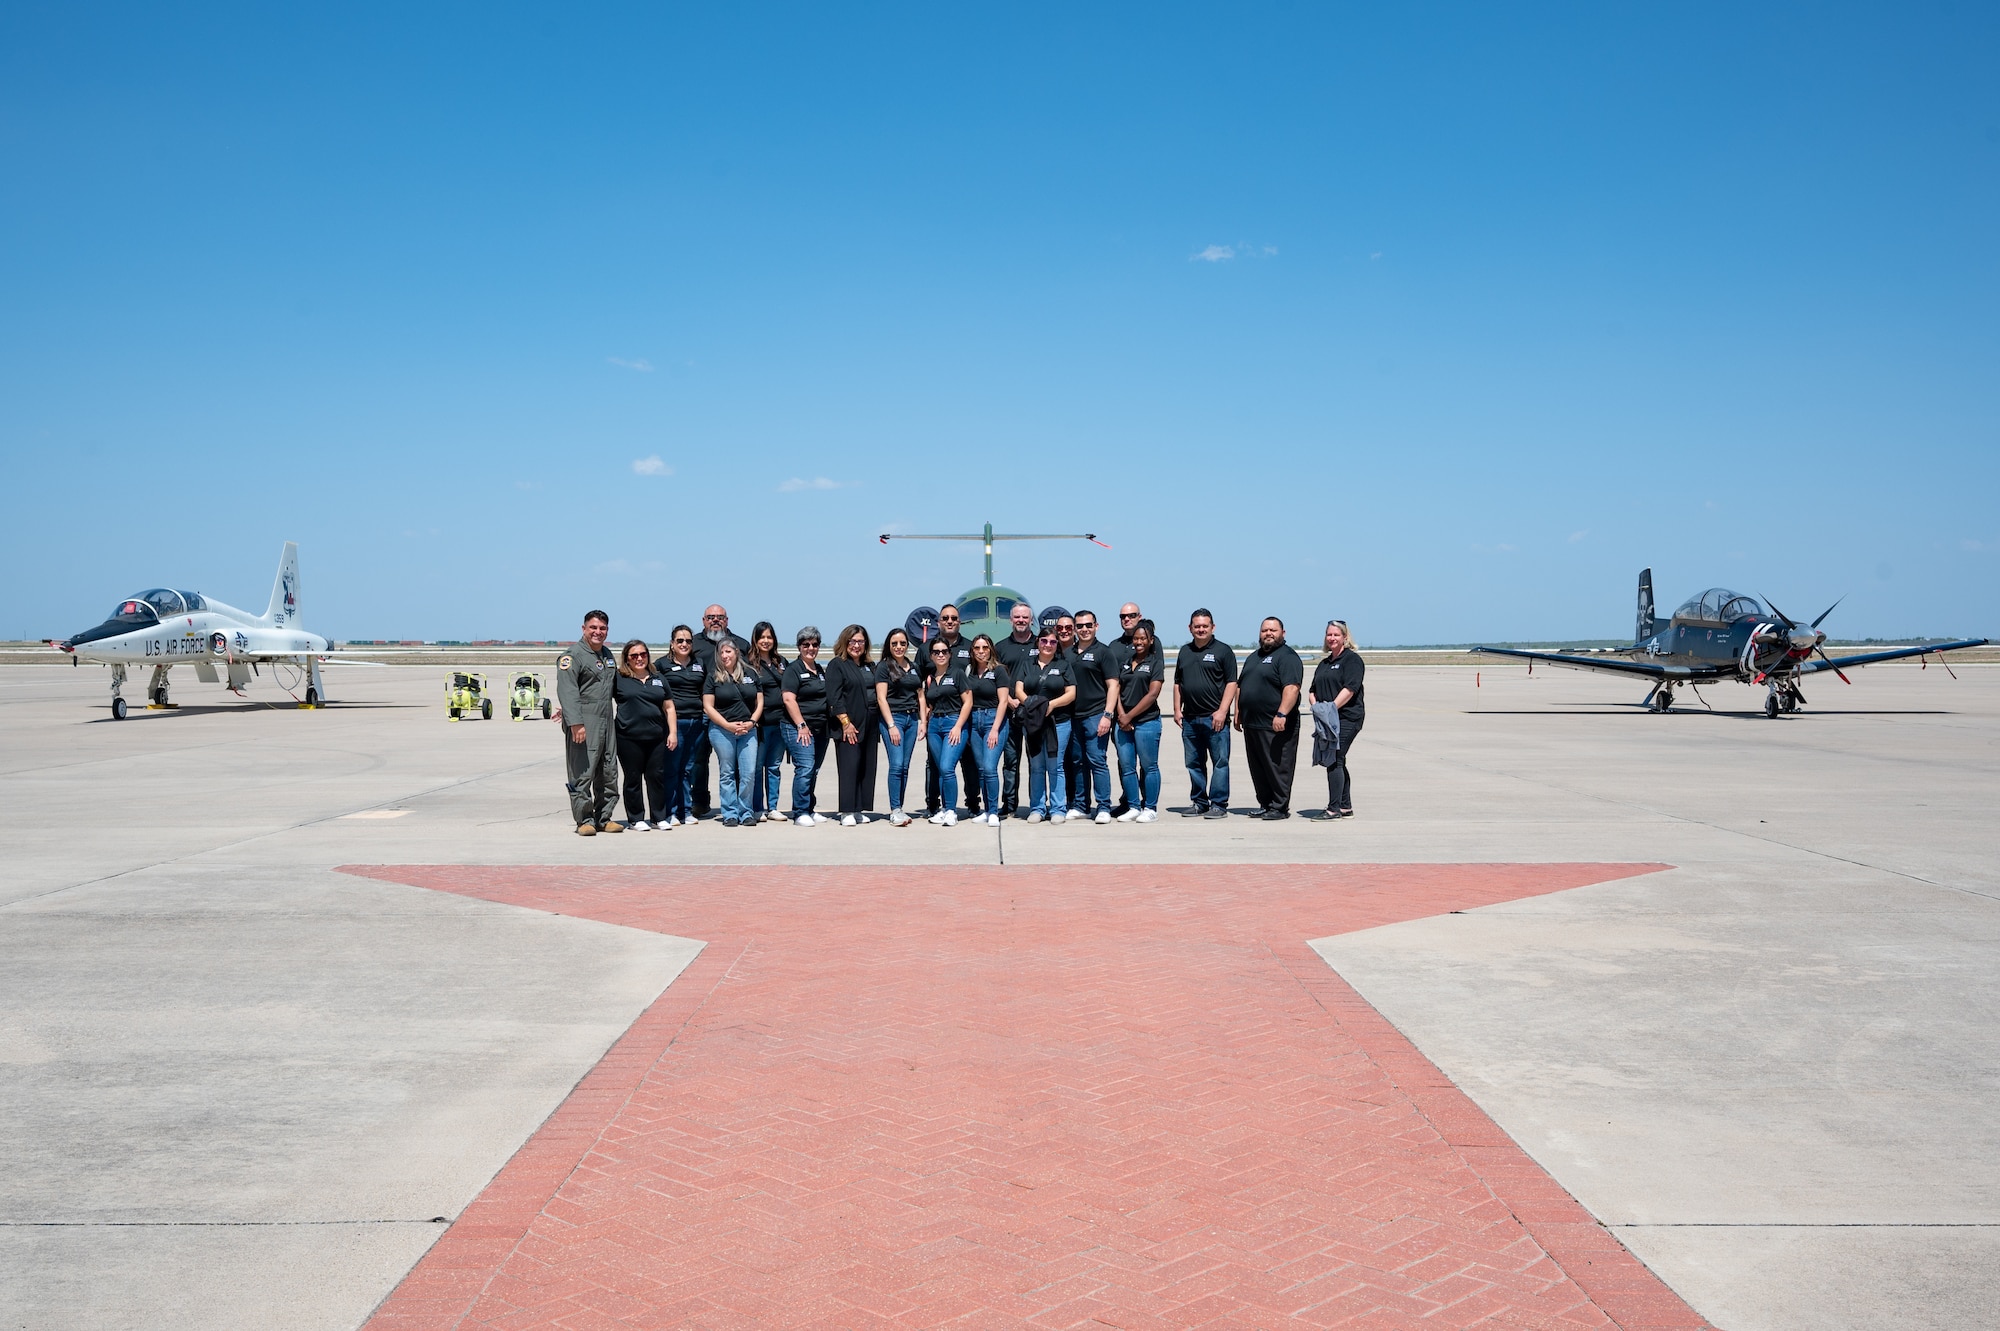 The tour showcased current, future and potential partnership agreements with the community of Del Rio and Team XL. (U.S. Air Force photo by Airman 1st Class Keira Rossman)